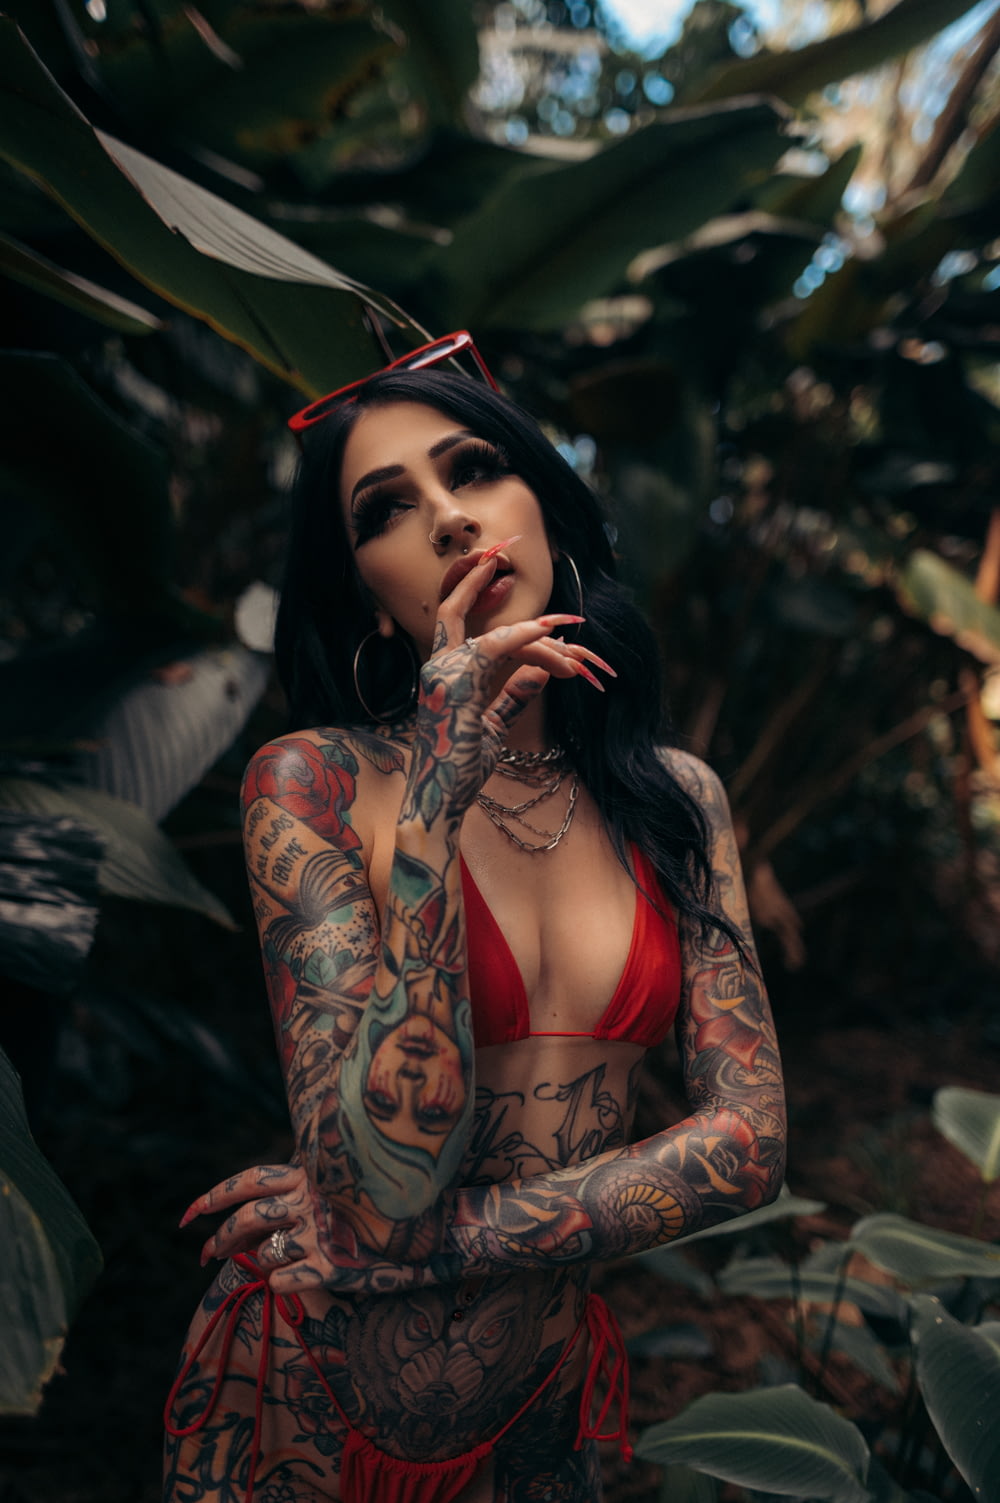 a woman in a red bikini with tattoos smoking a cigarette